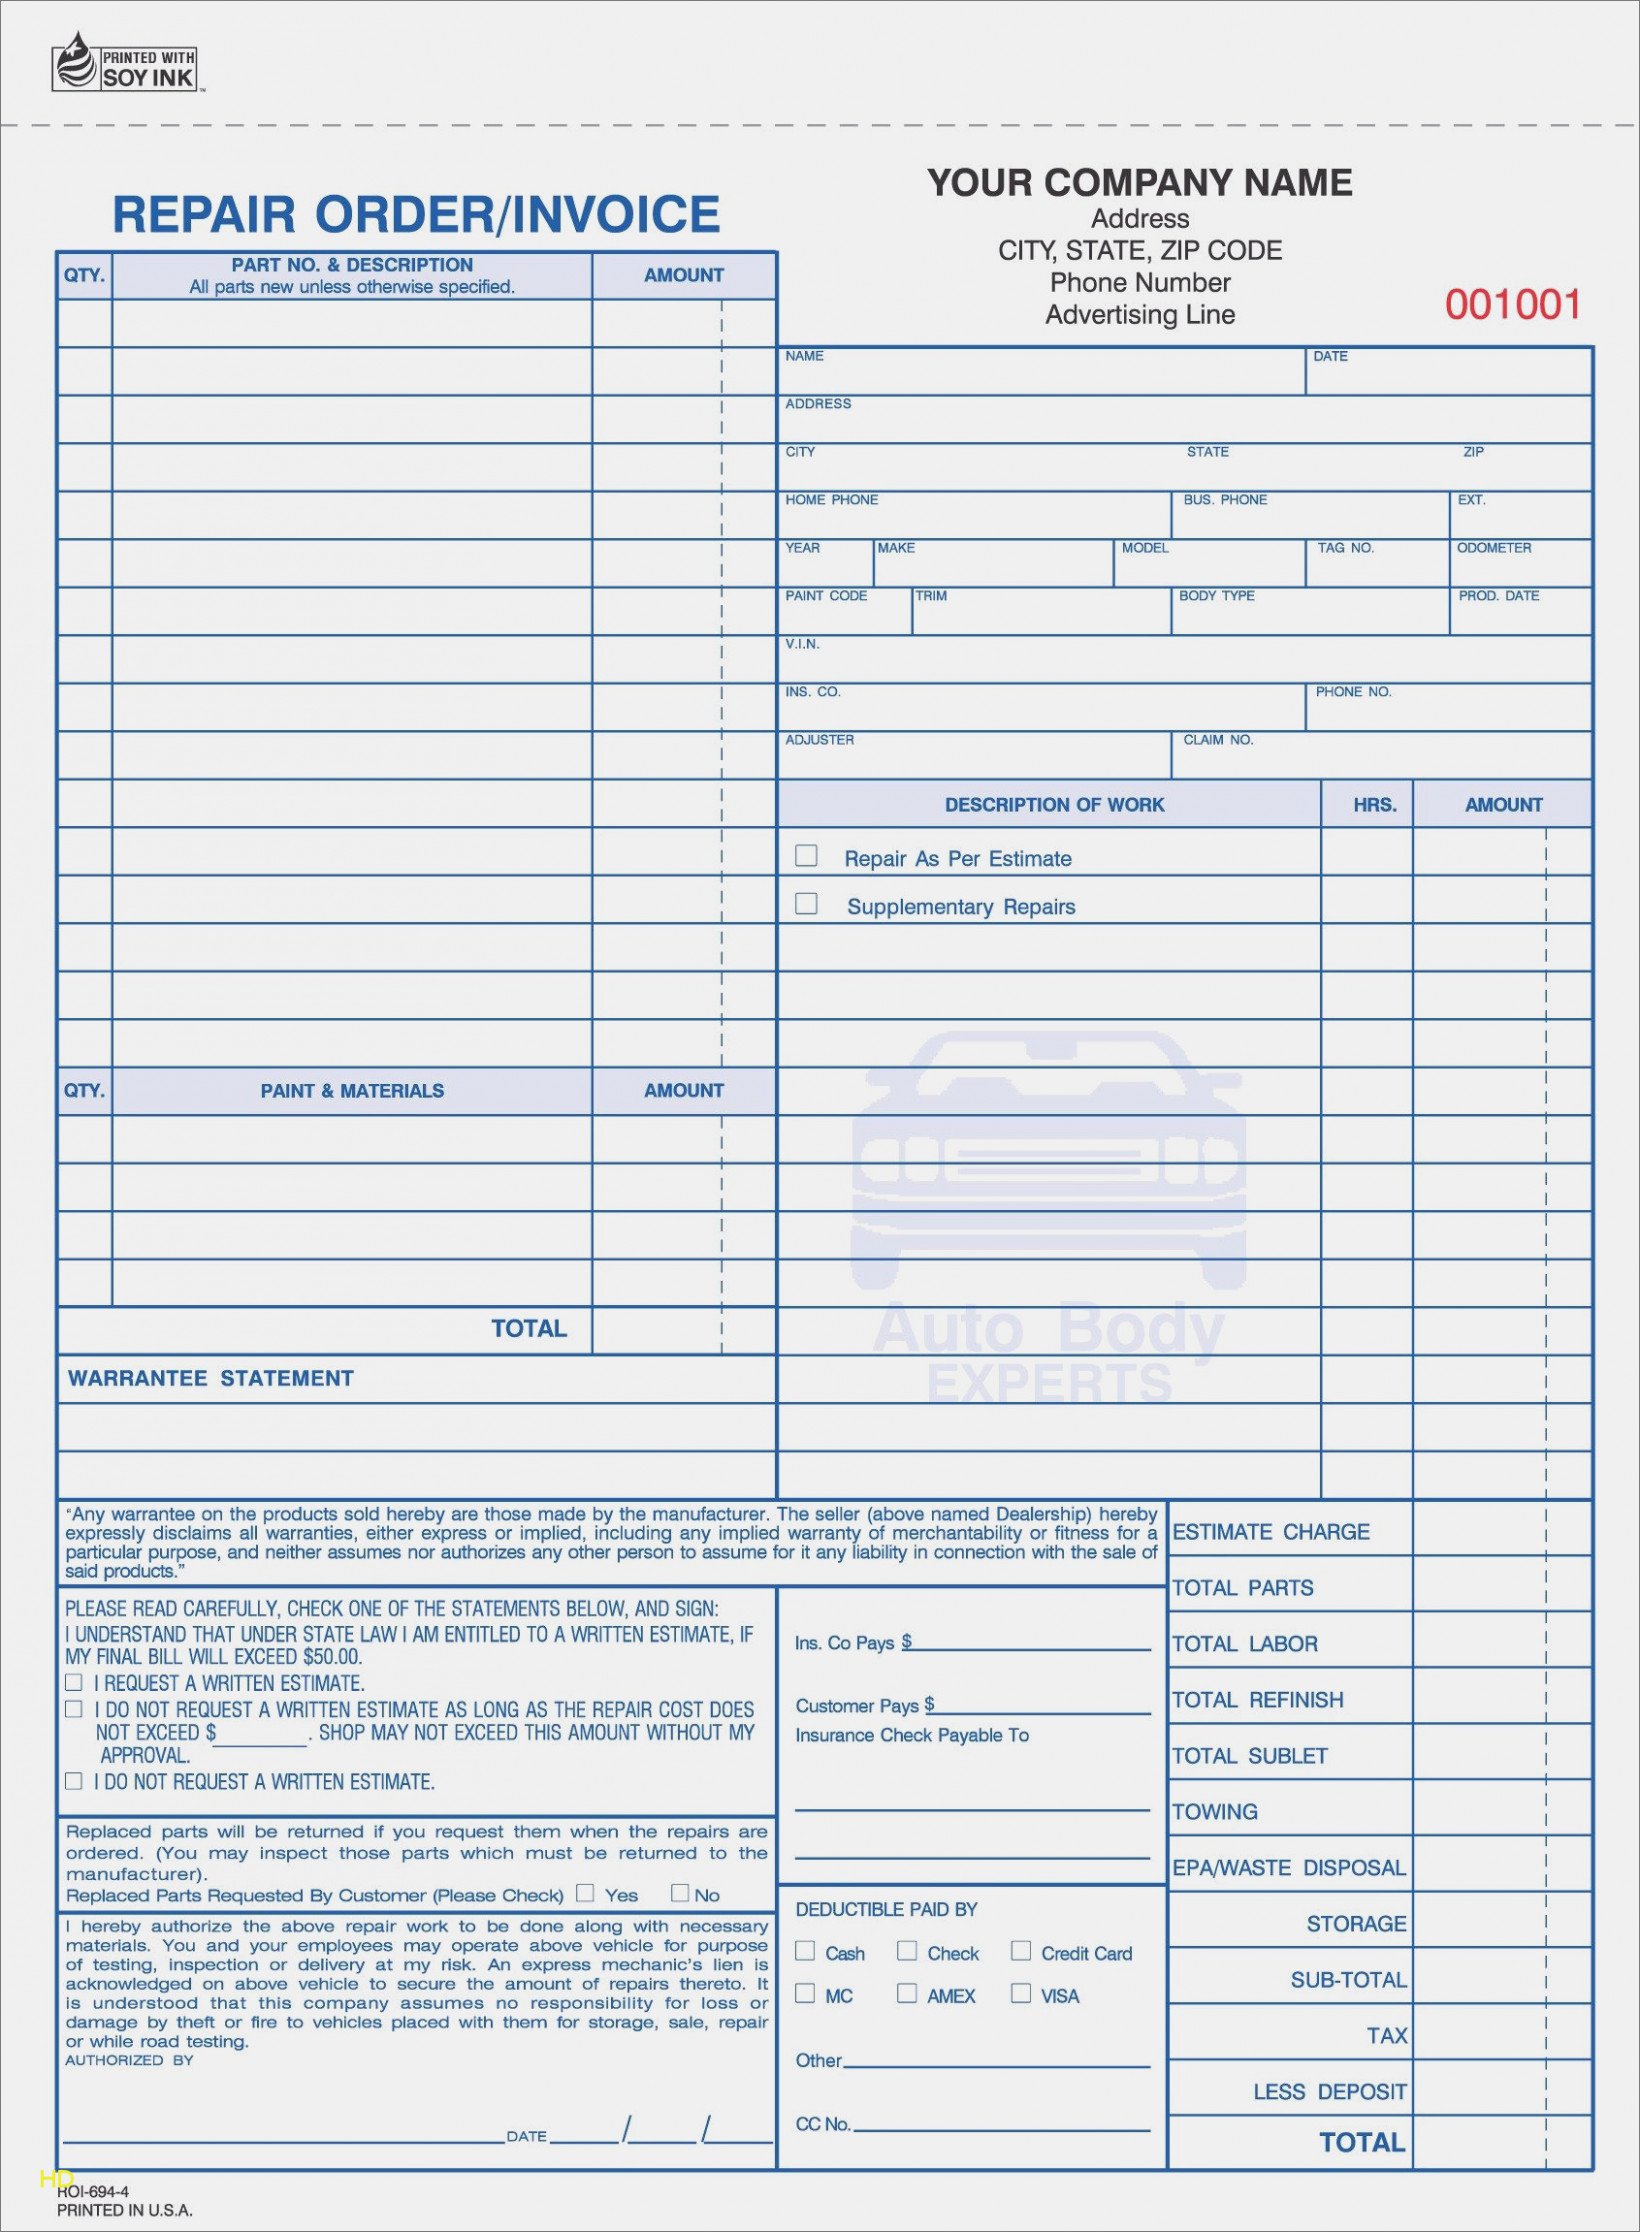 Free Auto Repair Invoice Template Lovely 15 Doubts About Free Auto